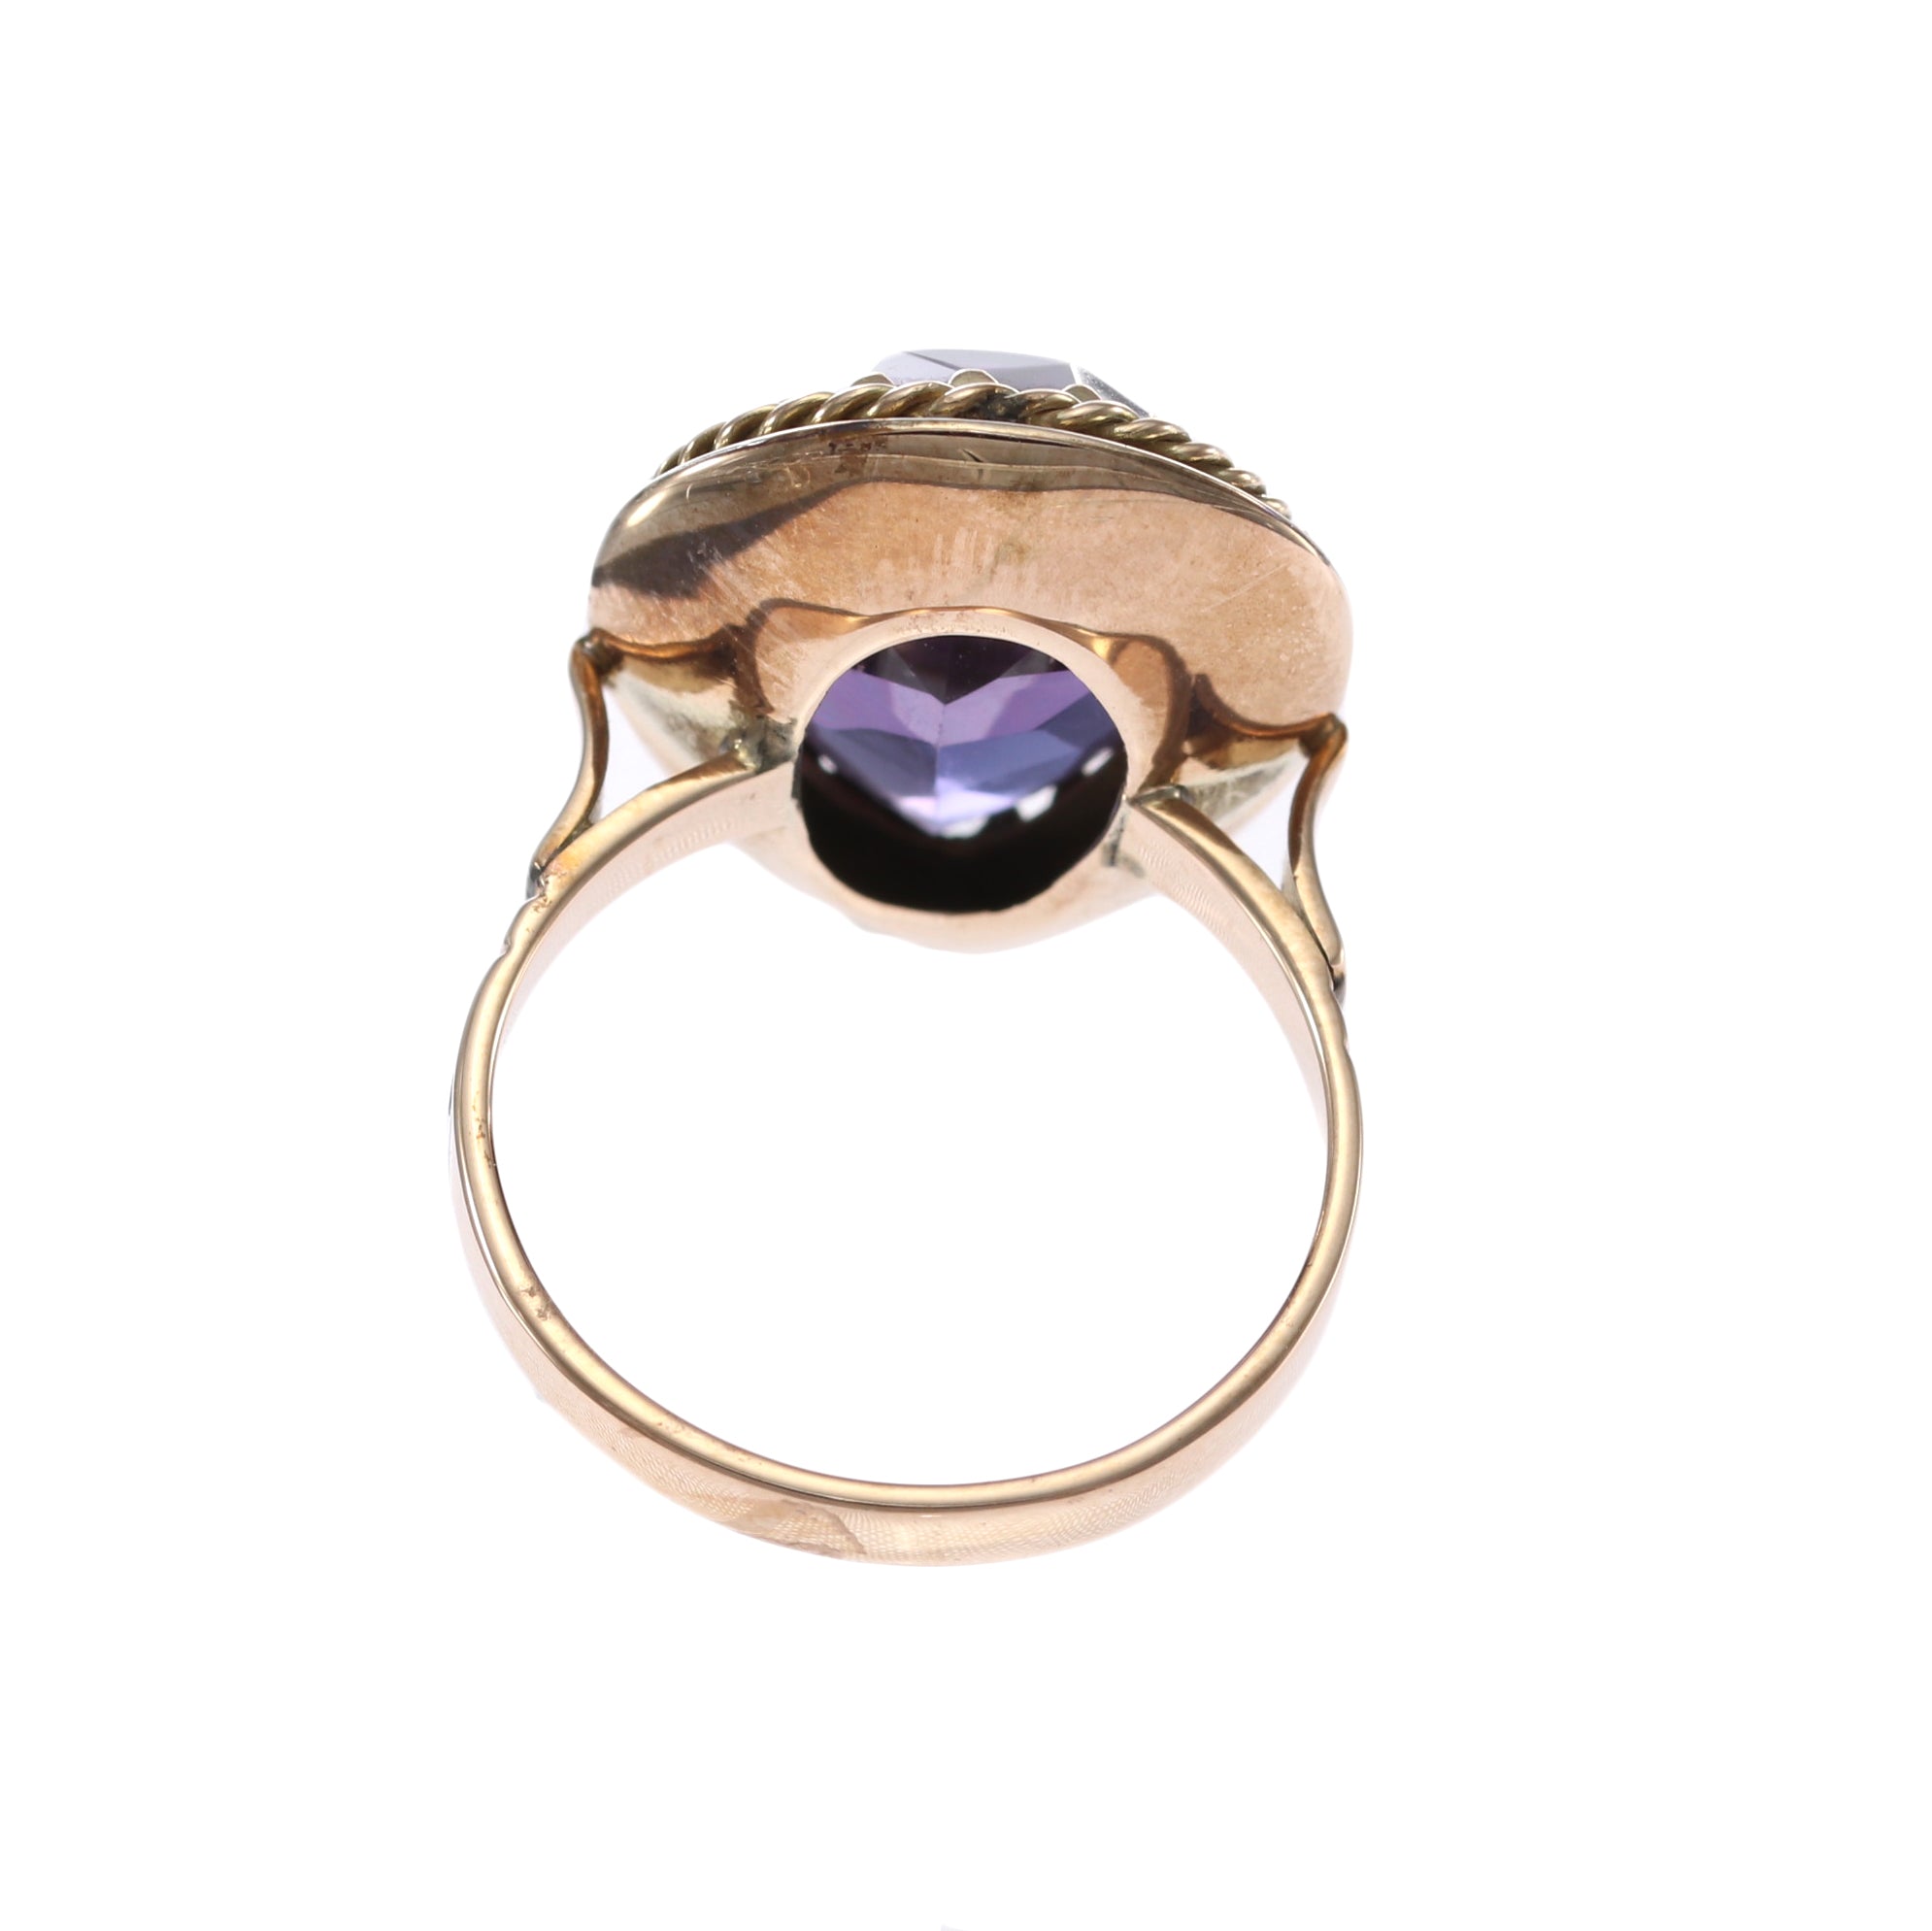 Antique Victorian 9.35CTW Pear Shape Amethyst Cocktail Ring 14k Rose Gold